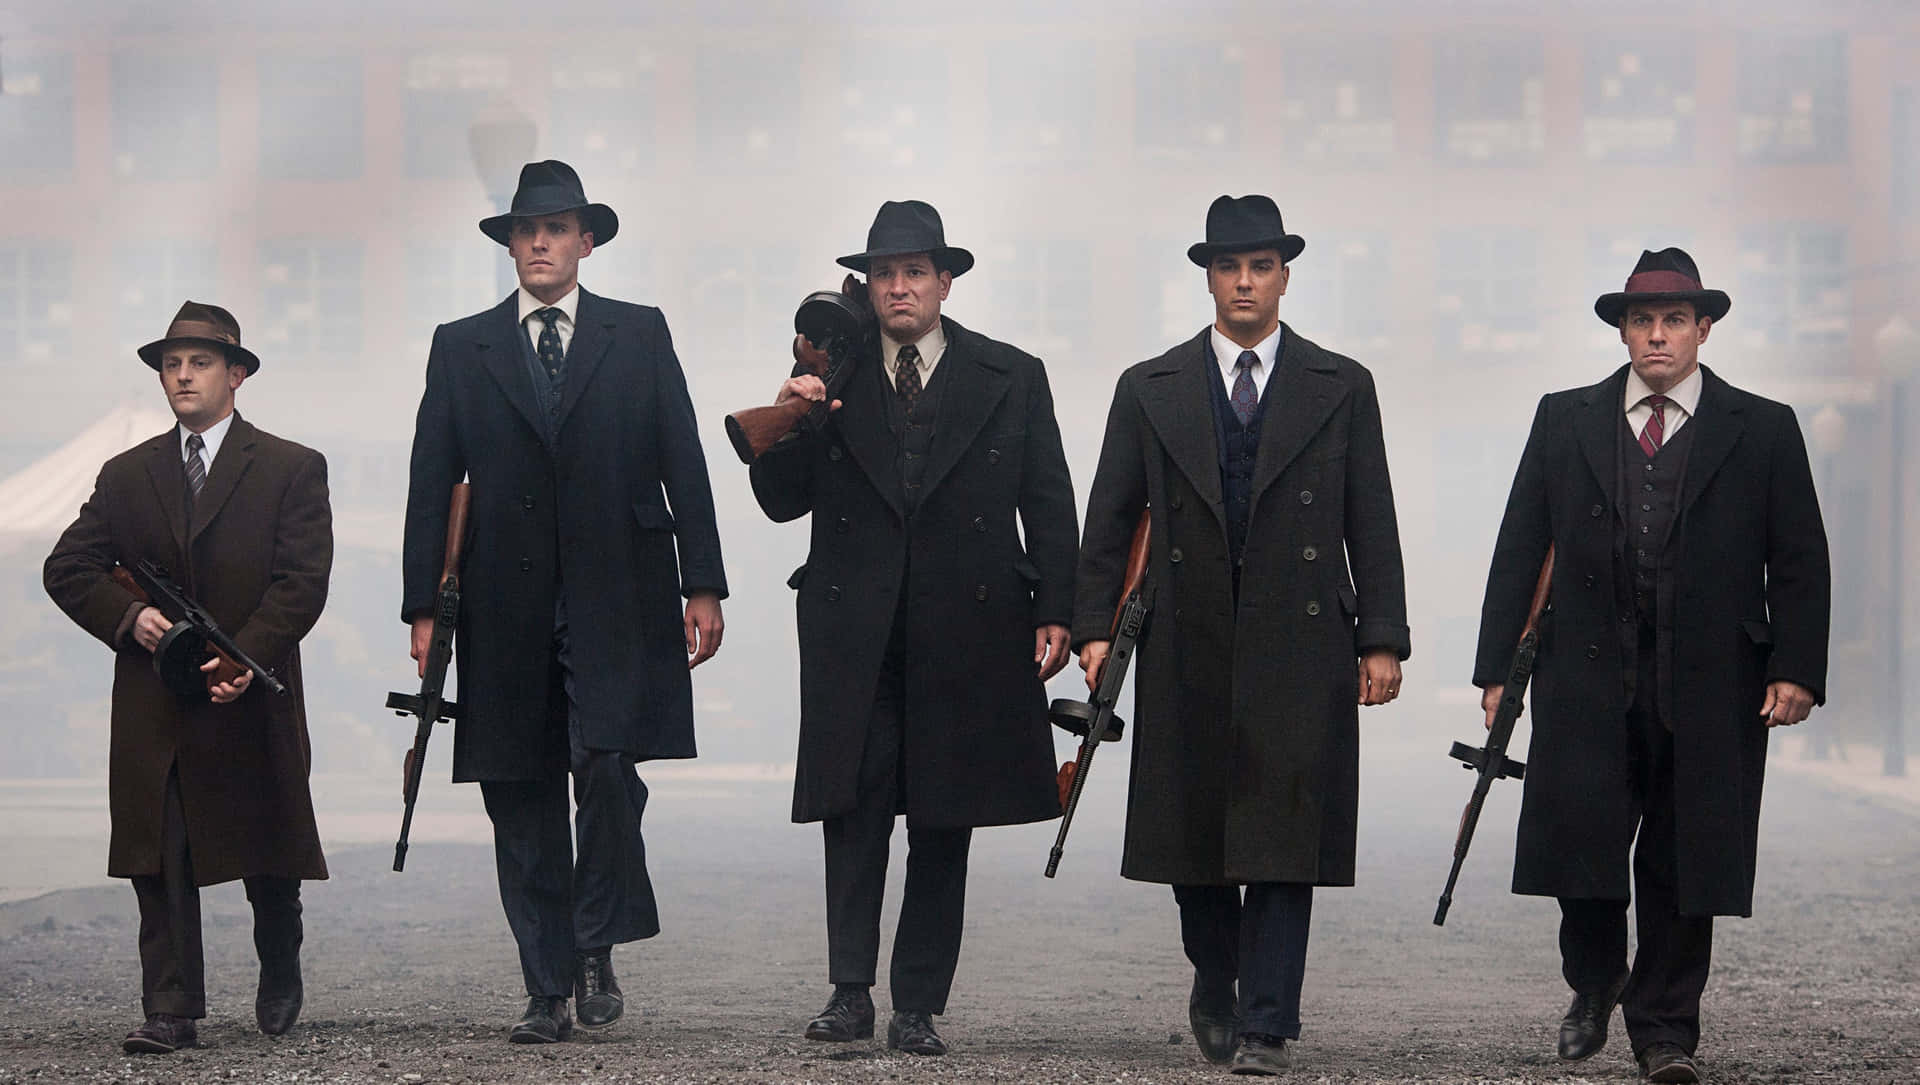 A Group Of Men In Suits And Hats Walking Down A Street